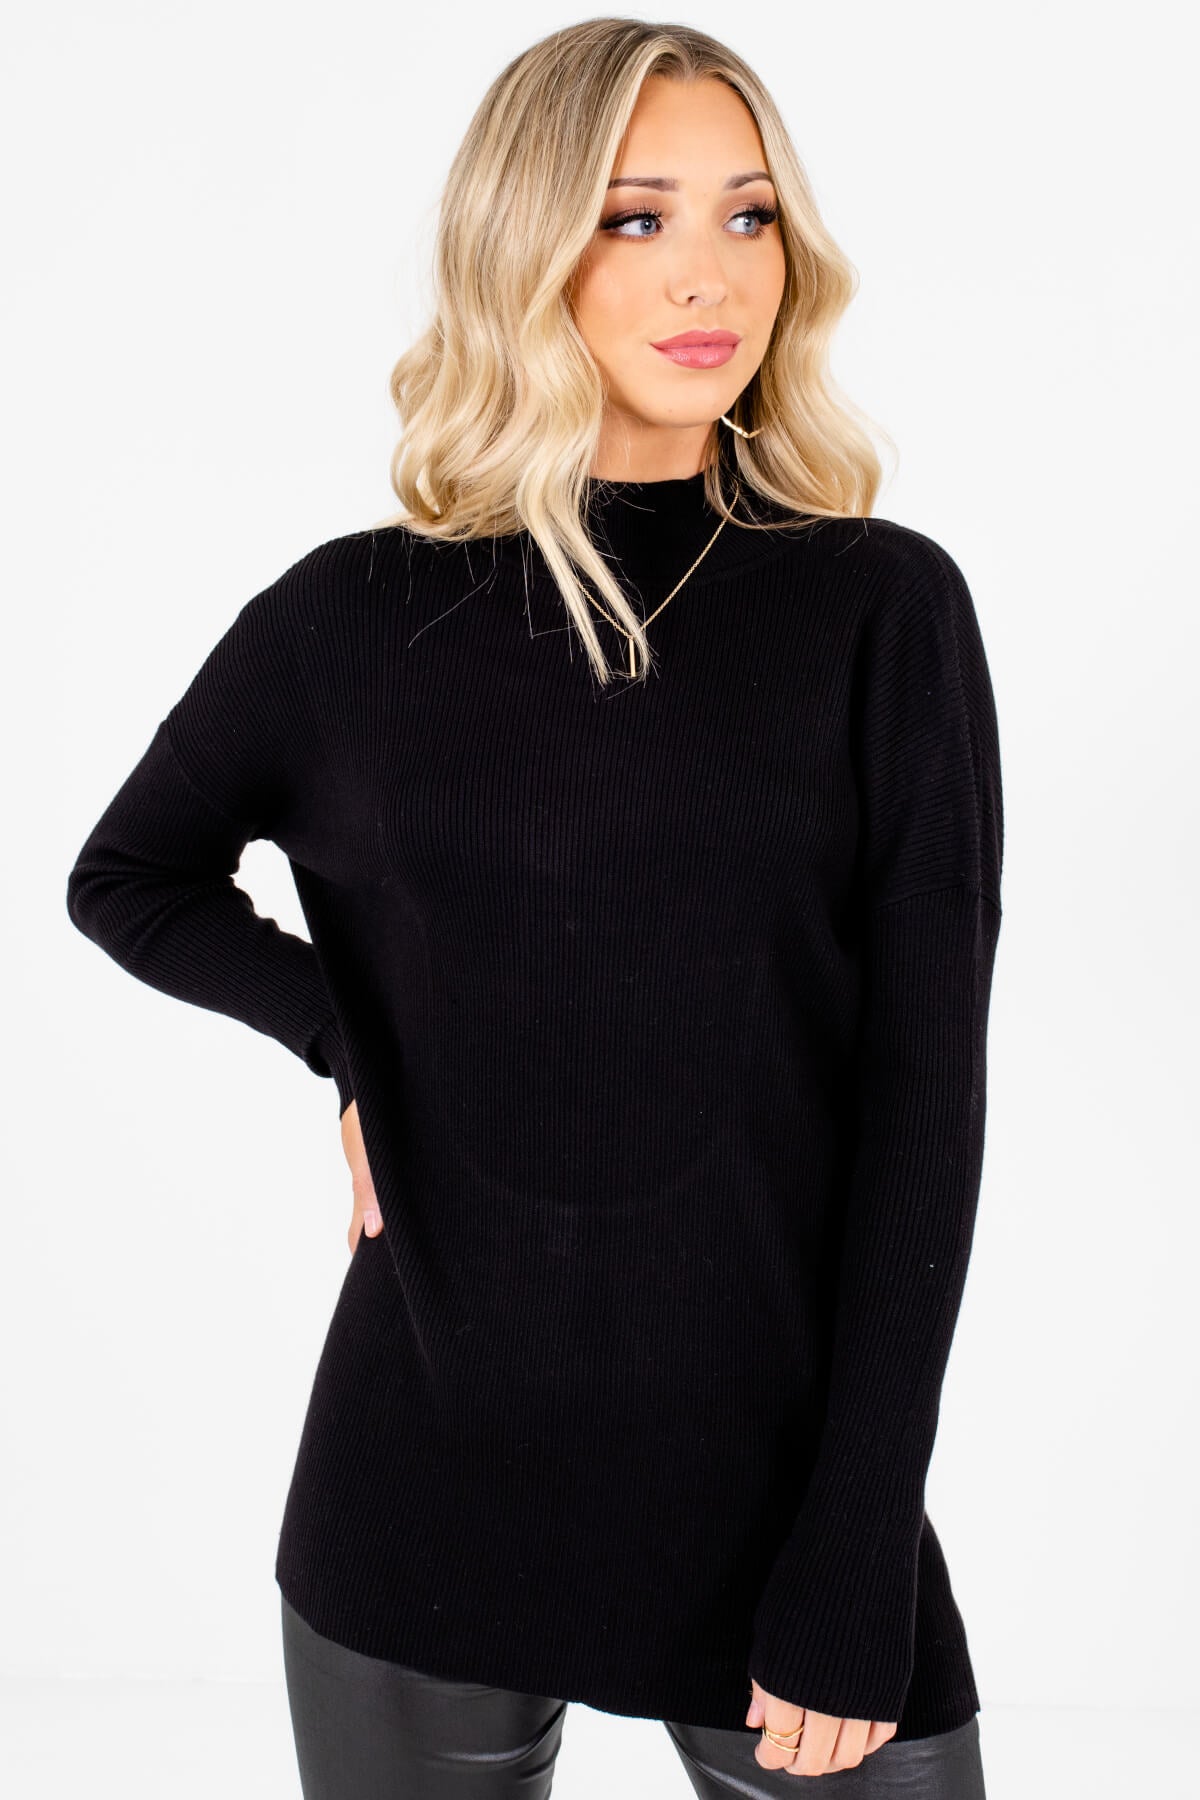 Black Open Back Style Boutique Sweaters for Women